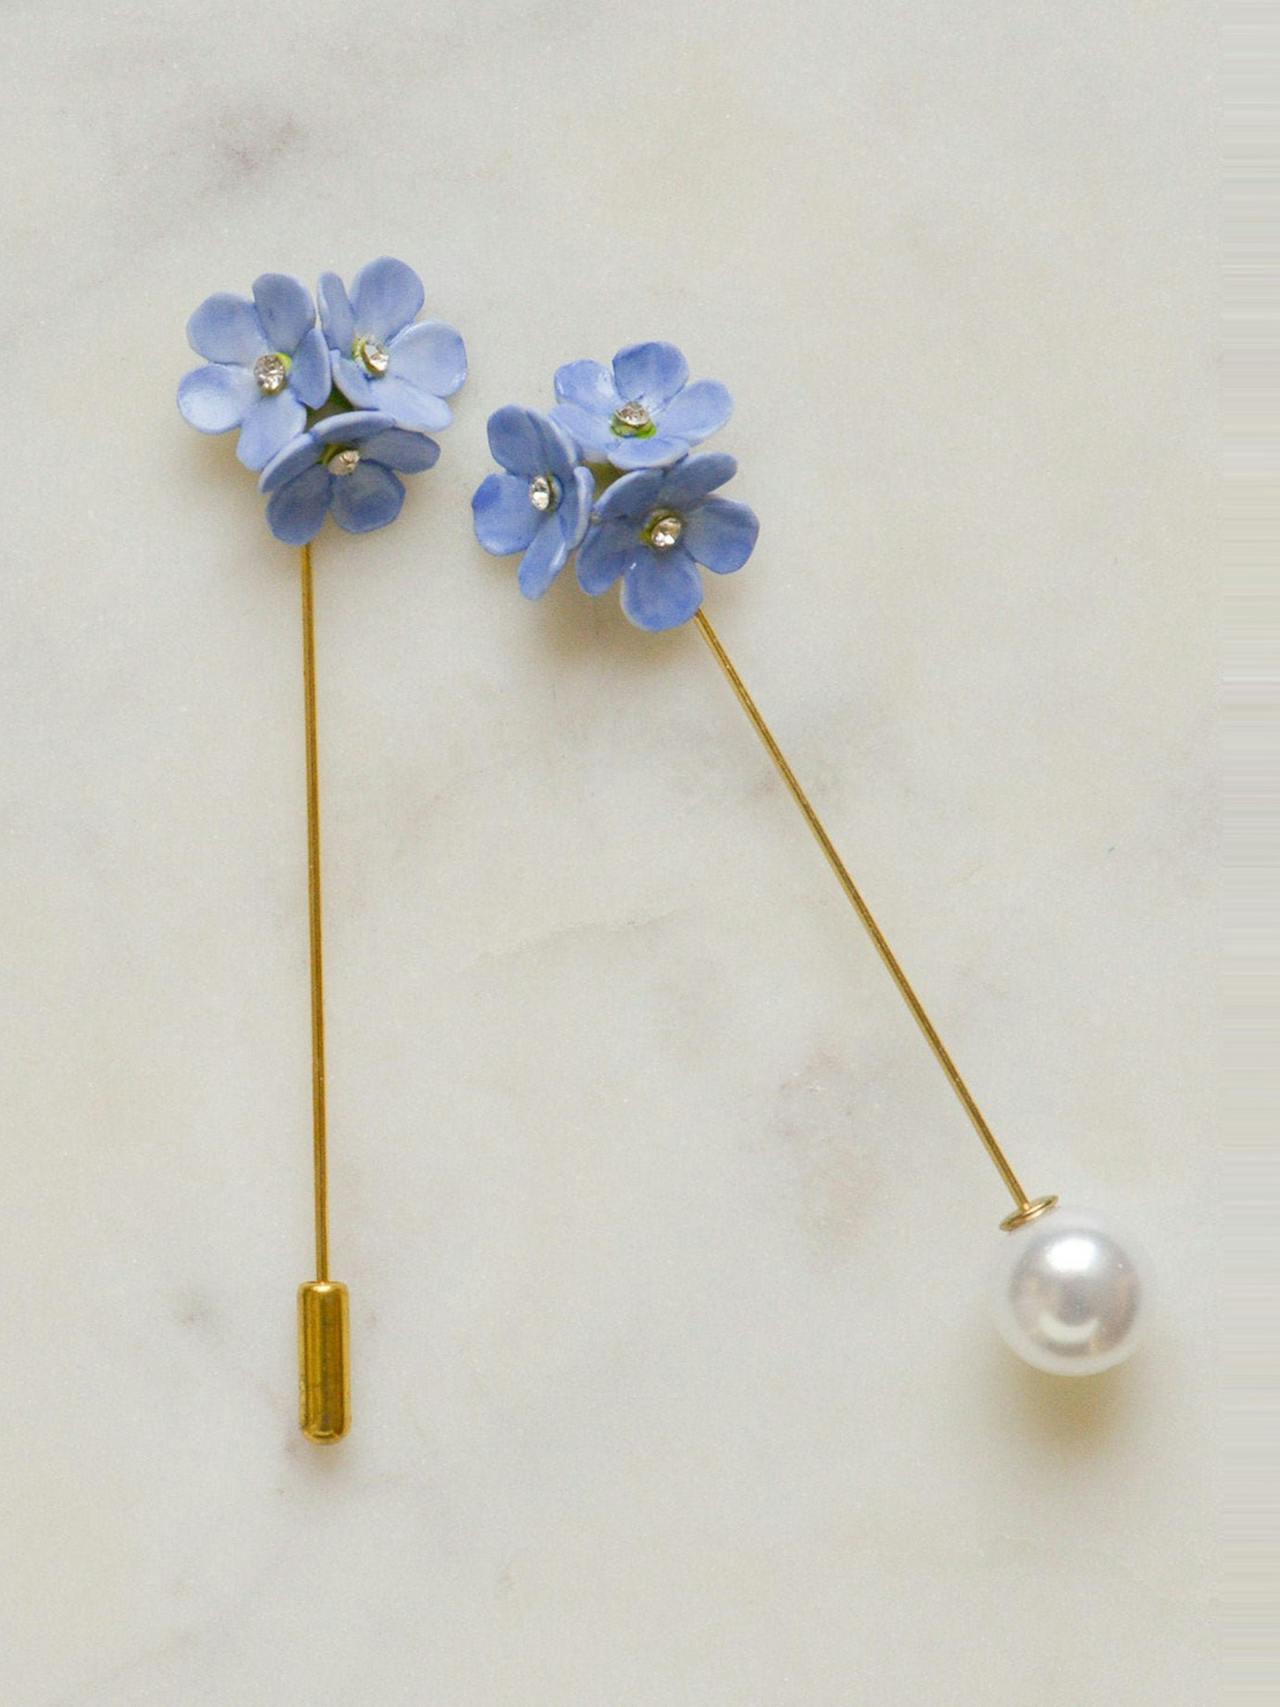 Forget Me Not brooch